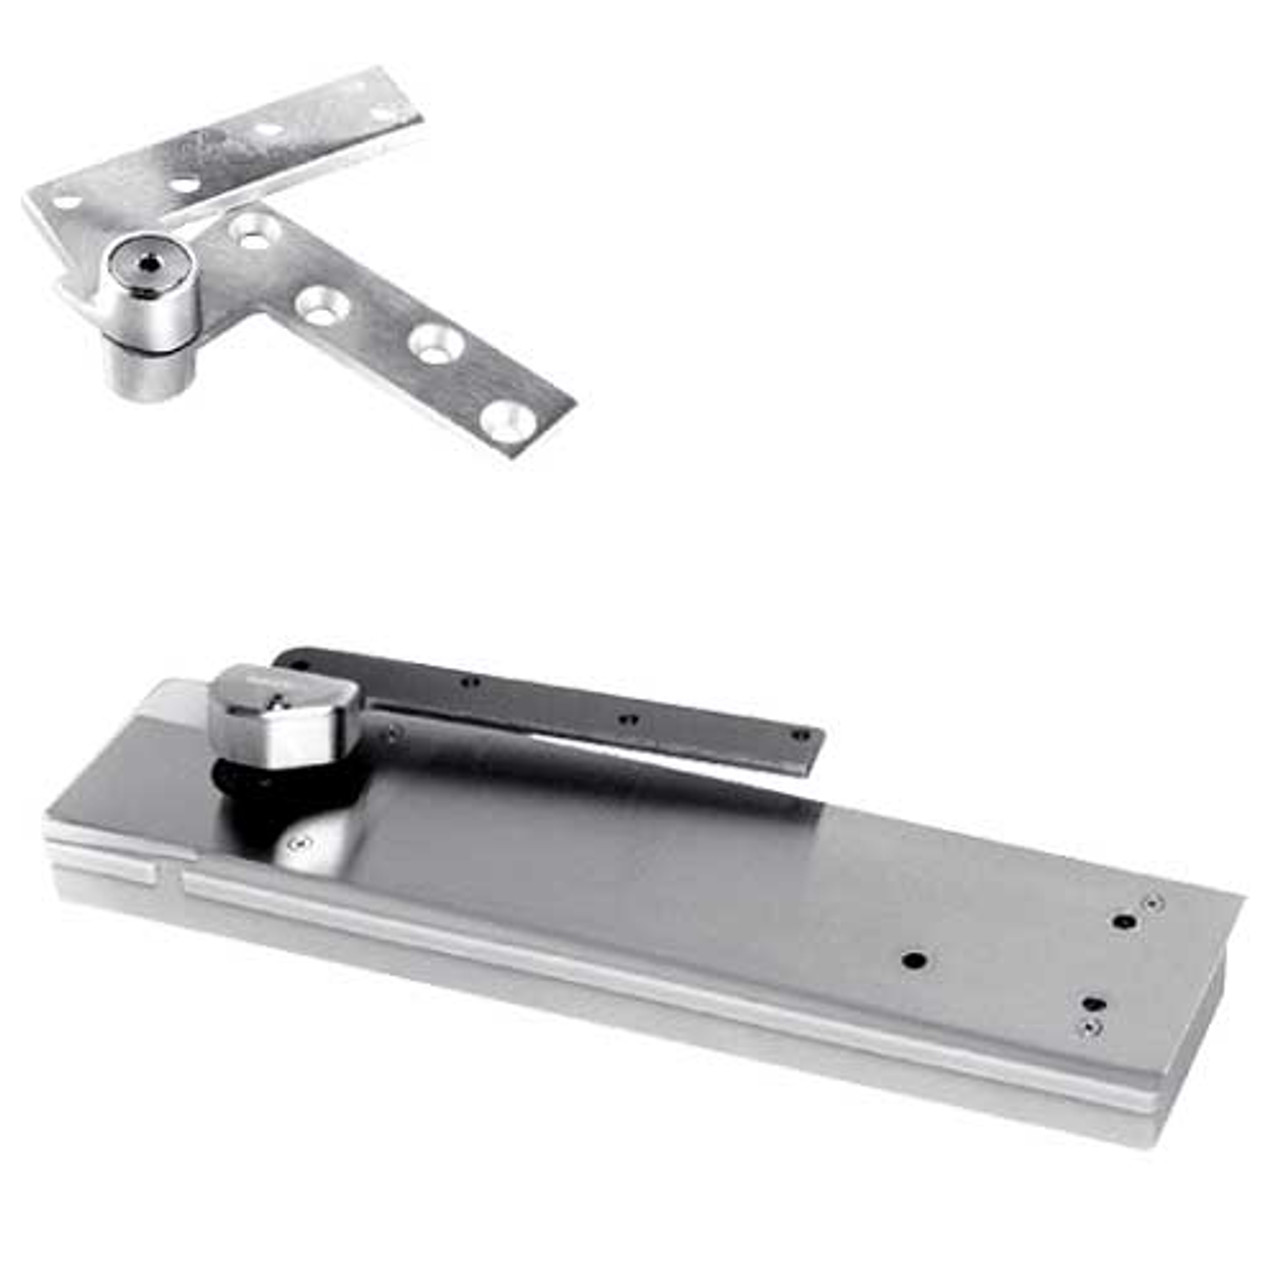 5104ABC90-1-1/2OS-RH-625 Rixson 51 Series 1-1/2" Offset Hung Shallow Depth Floor Closers in Bright Chrome Finish